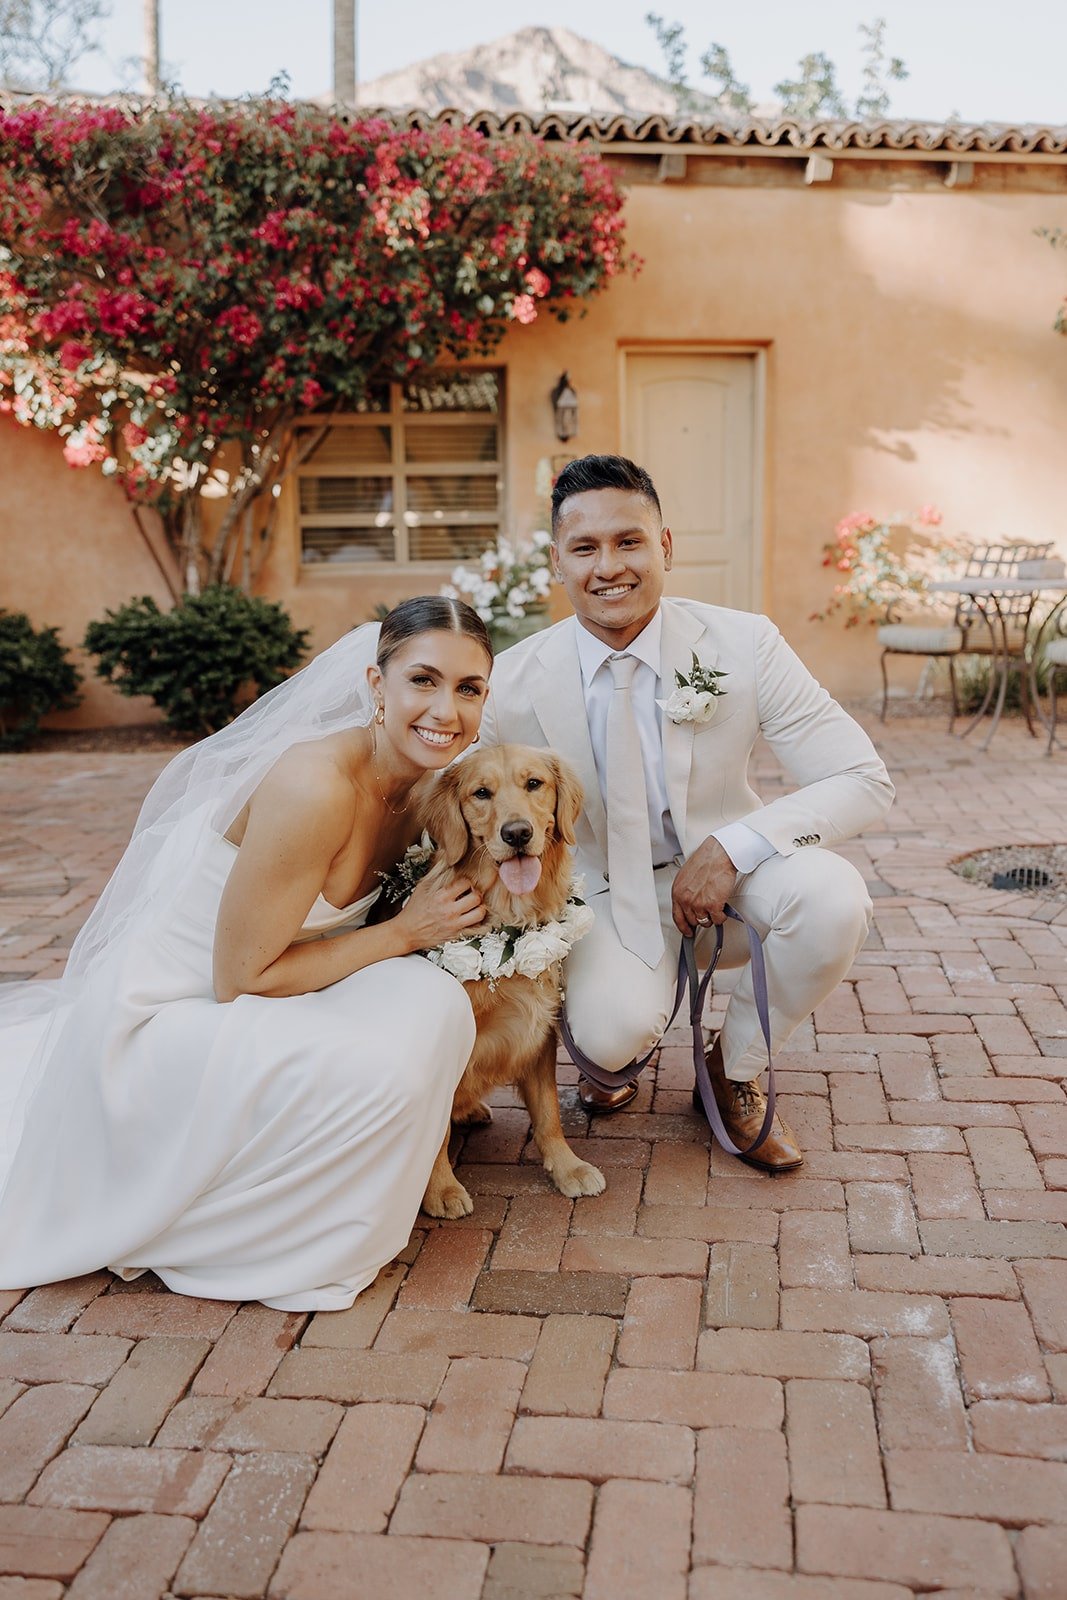 Bride and groom photo with their golden retriever dog